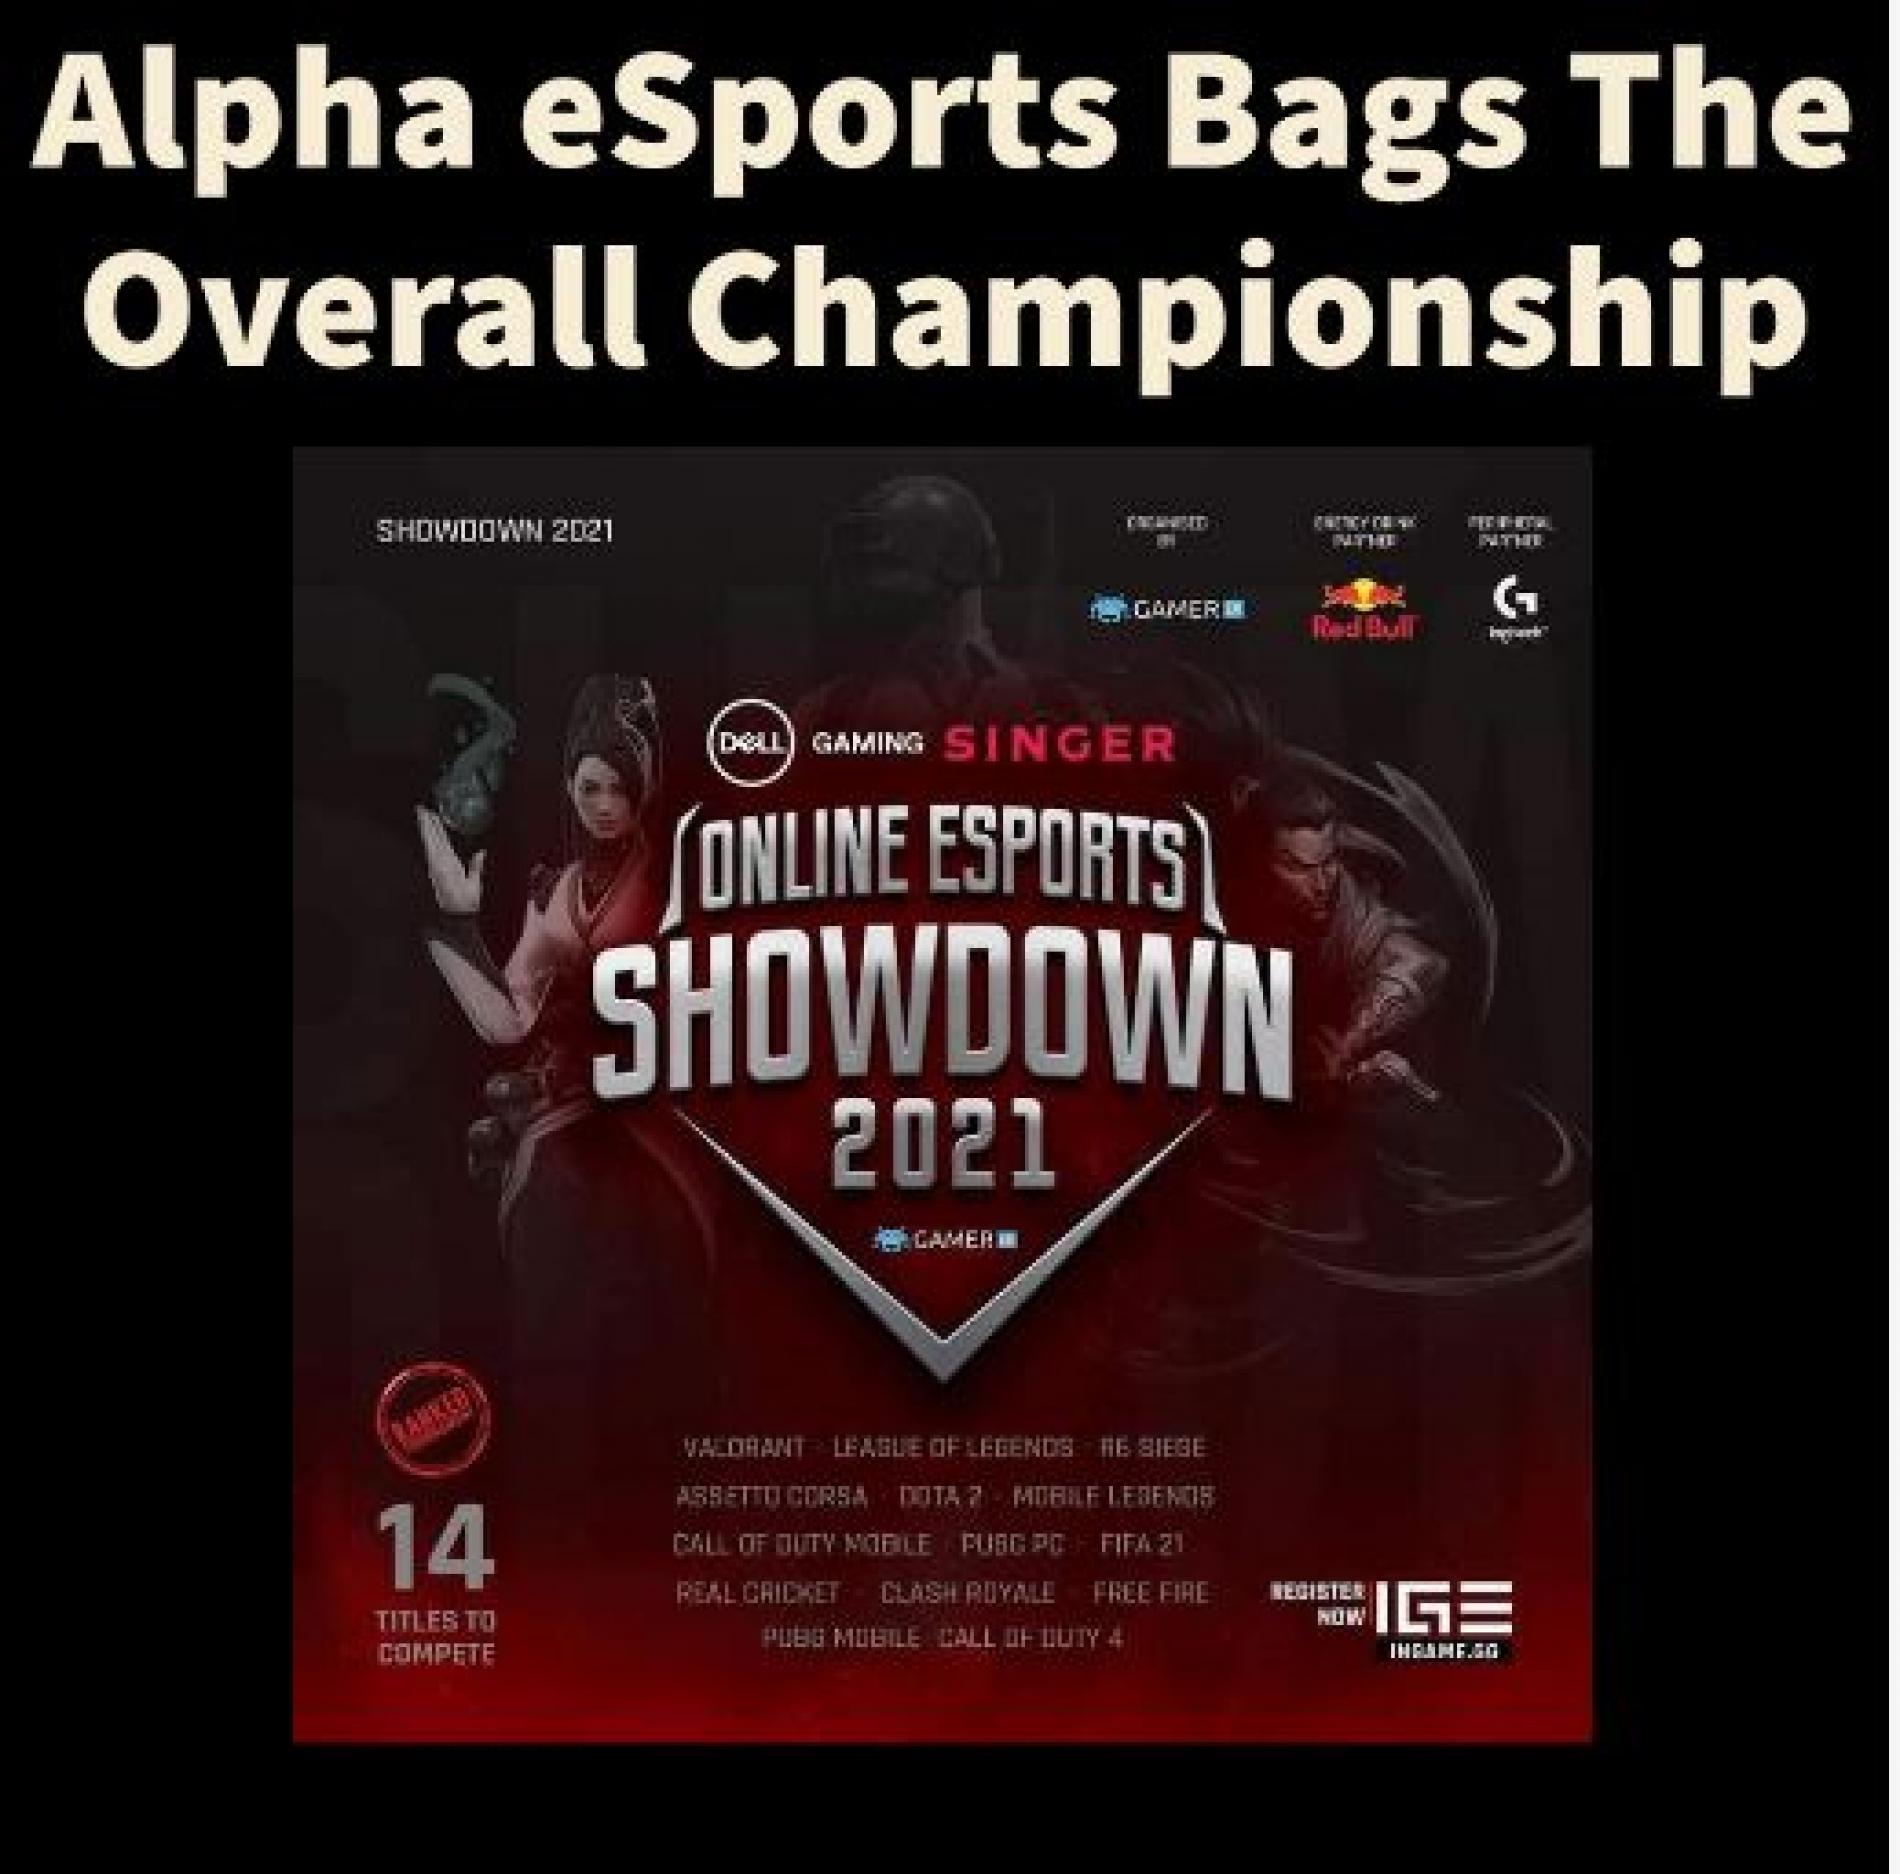 Online eSports Showdown Ends With Alpha eSports Bagging The Overall Championship